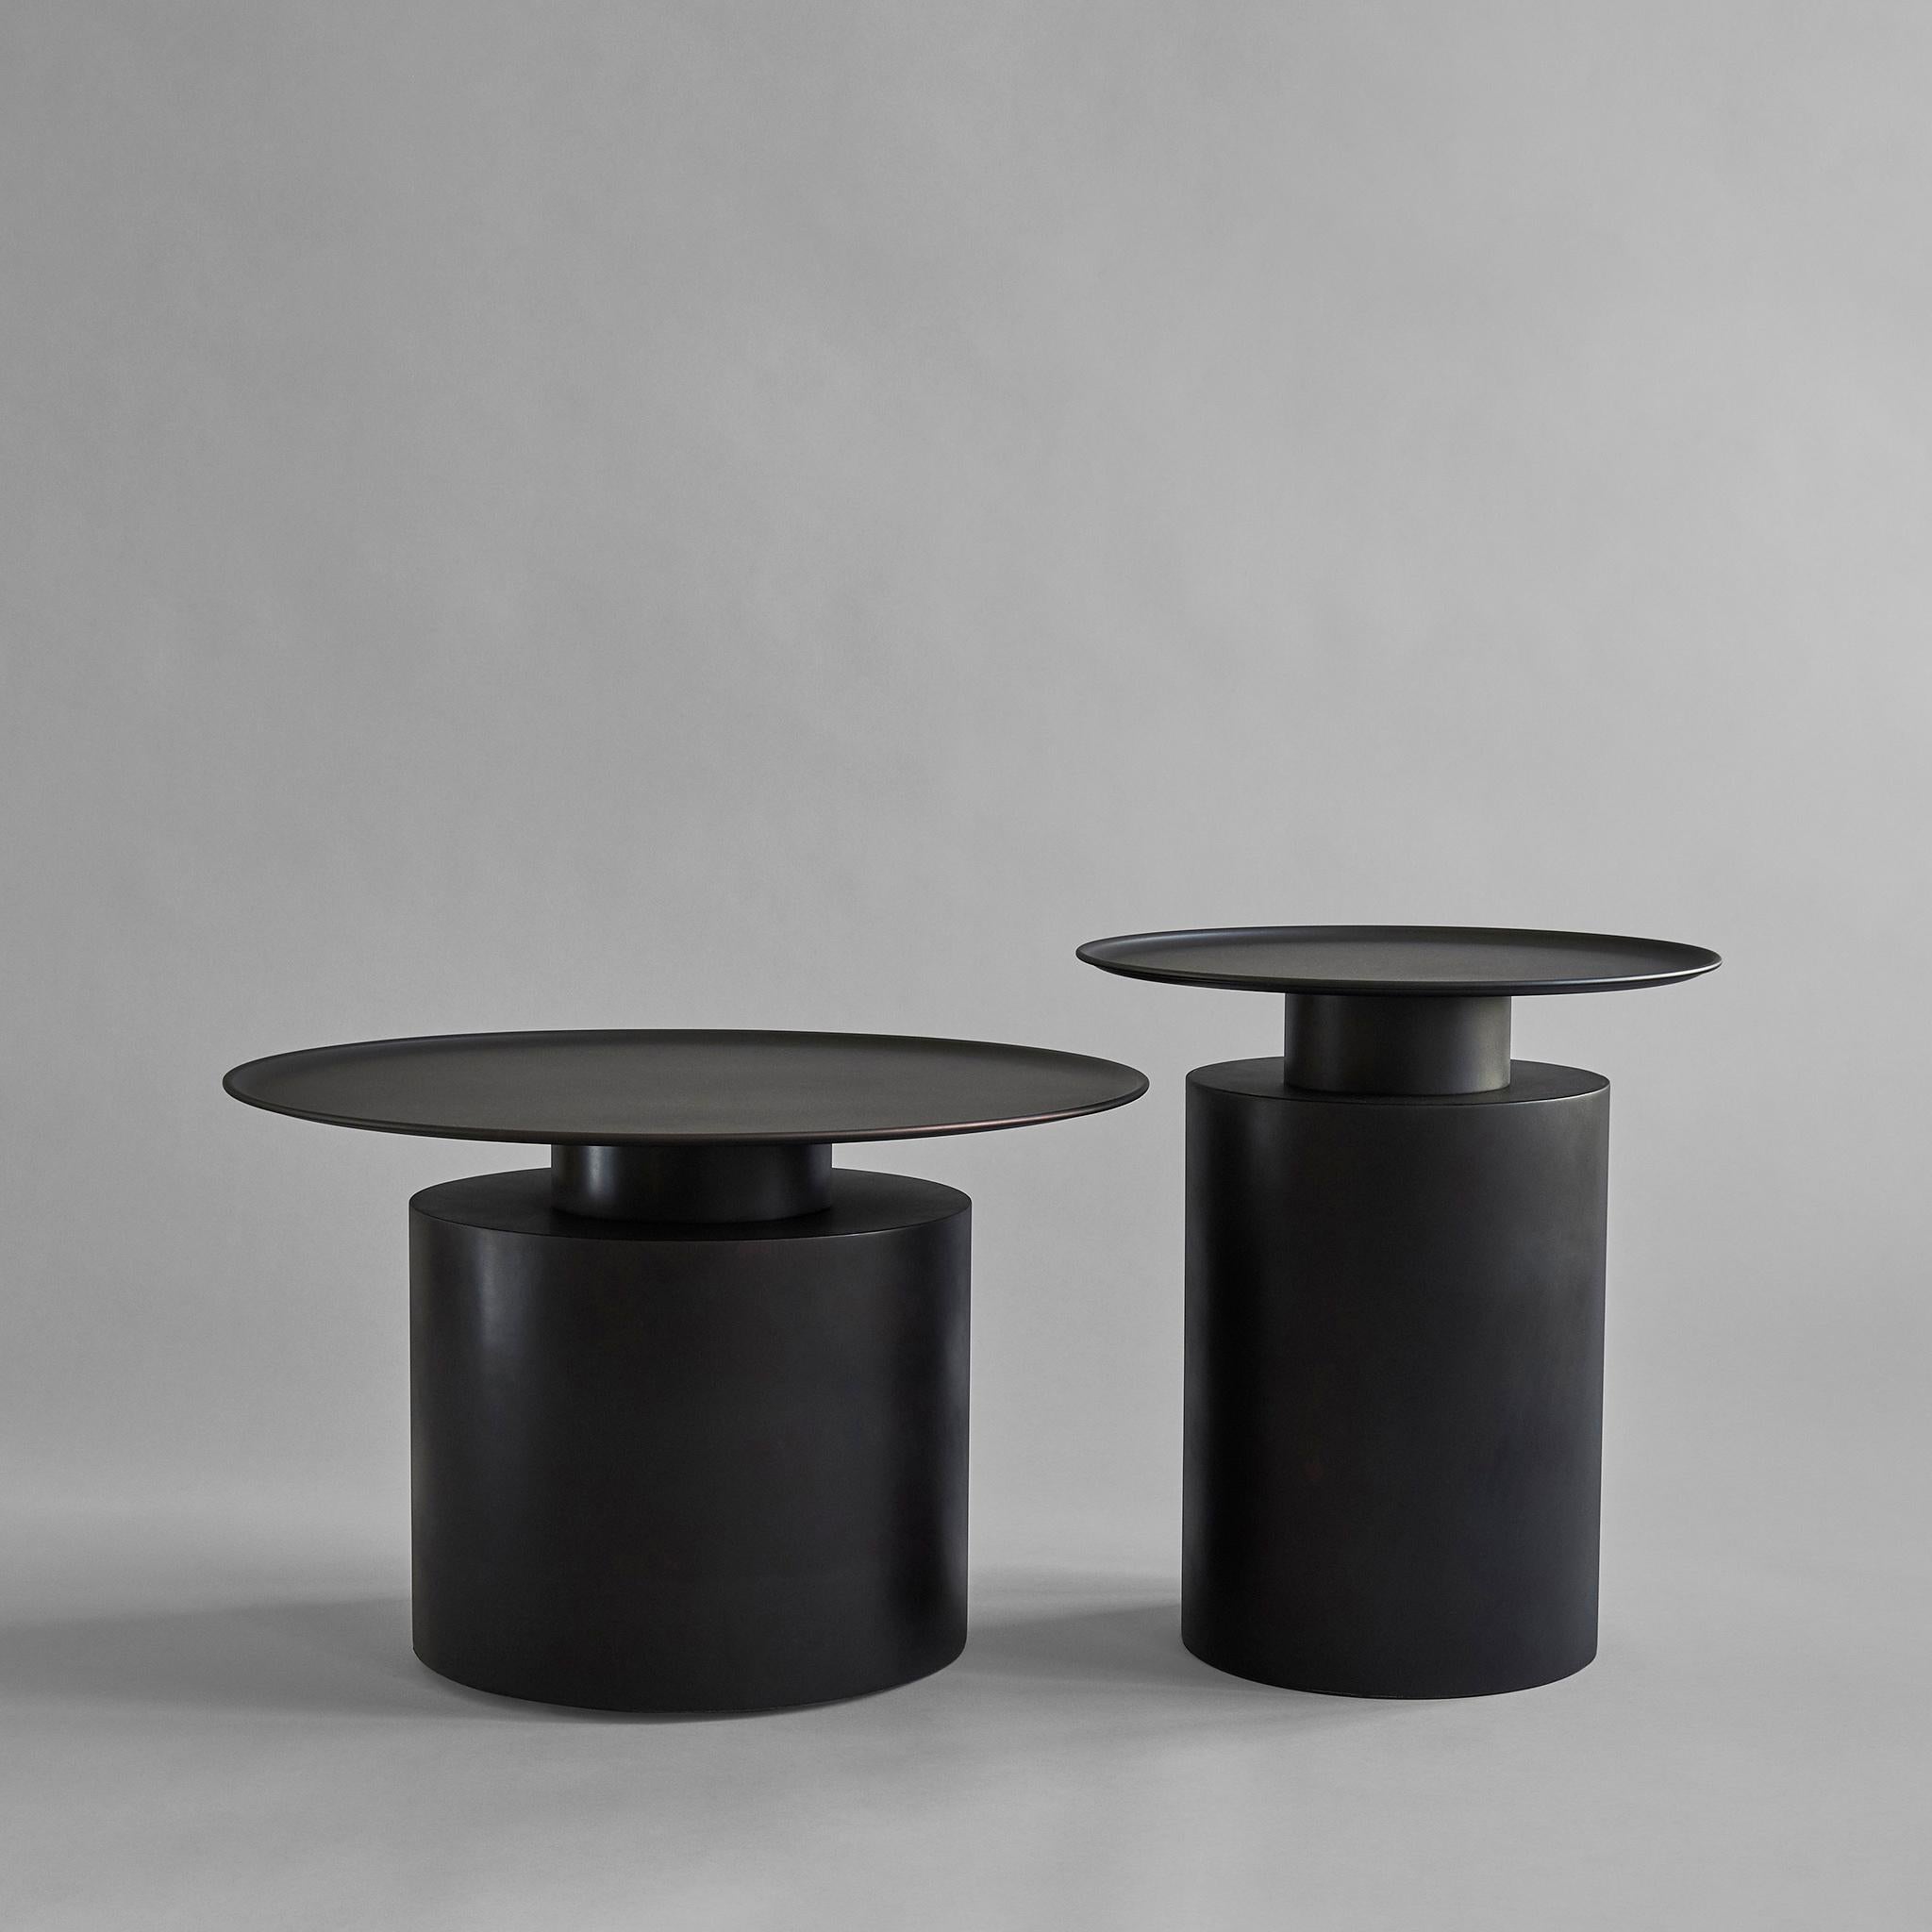 Burned black pillar table tall by 101 Copenhagen
Designed by Kristian Sofus Hansen & Tommy Hyldahl
Dimensions: L 50 / W 45 /H 45 Ccm.
Materials: plated metal

Pillar is inspired by the rich lustrous use of material in the 1930´s Art Deco